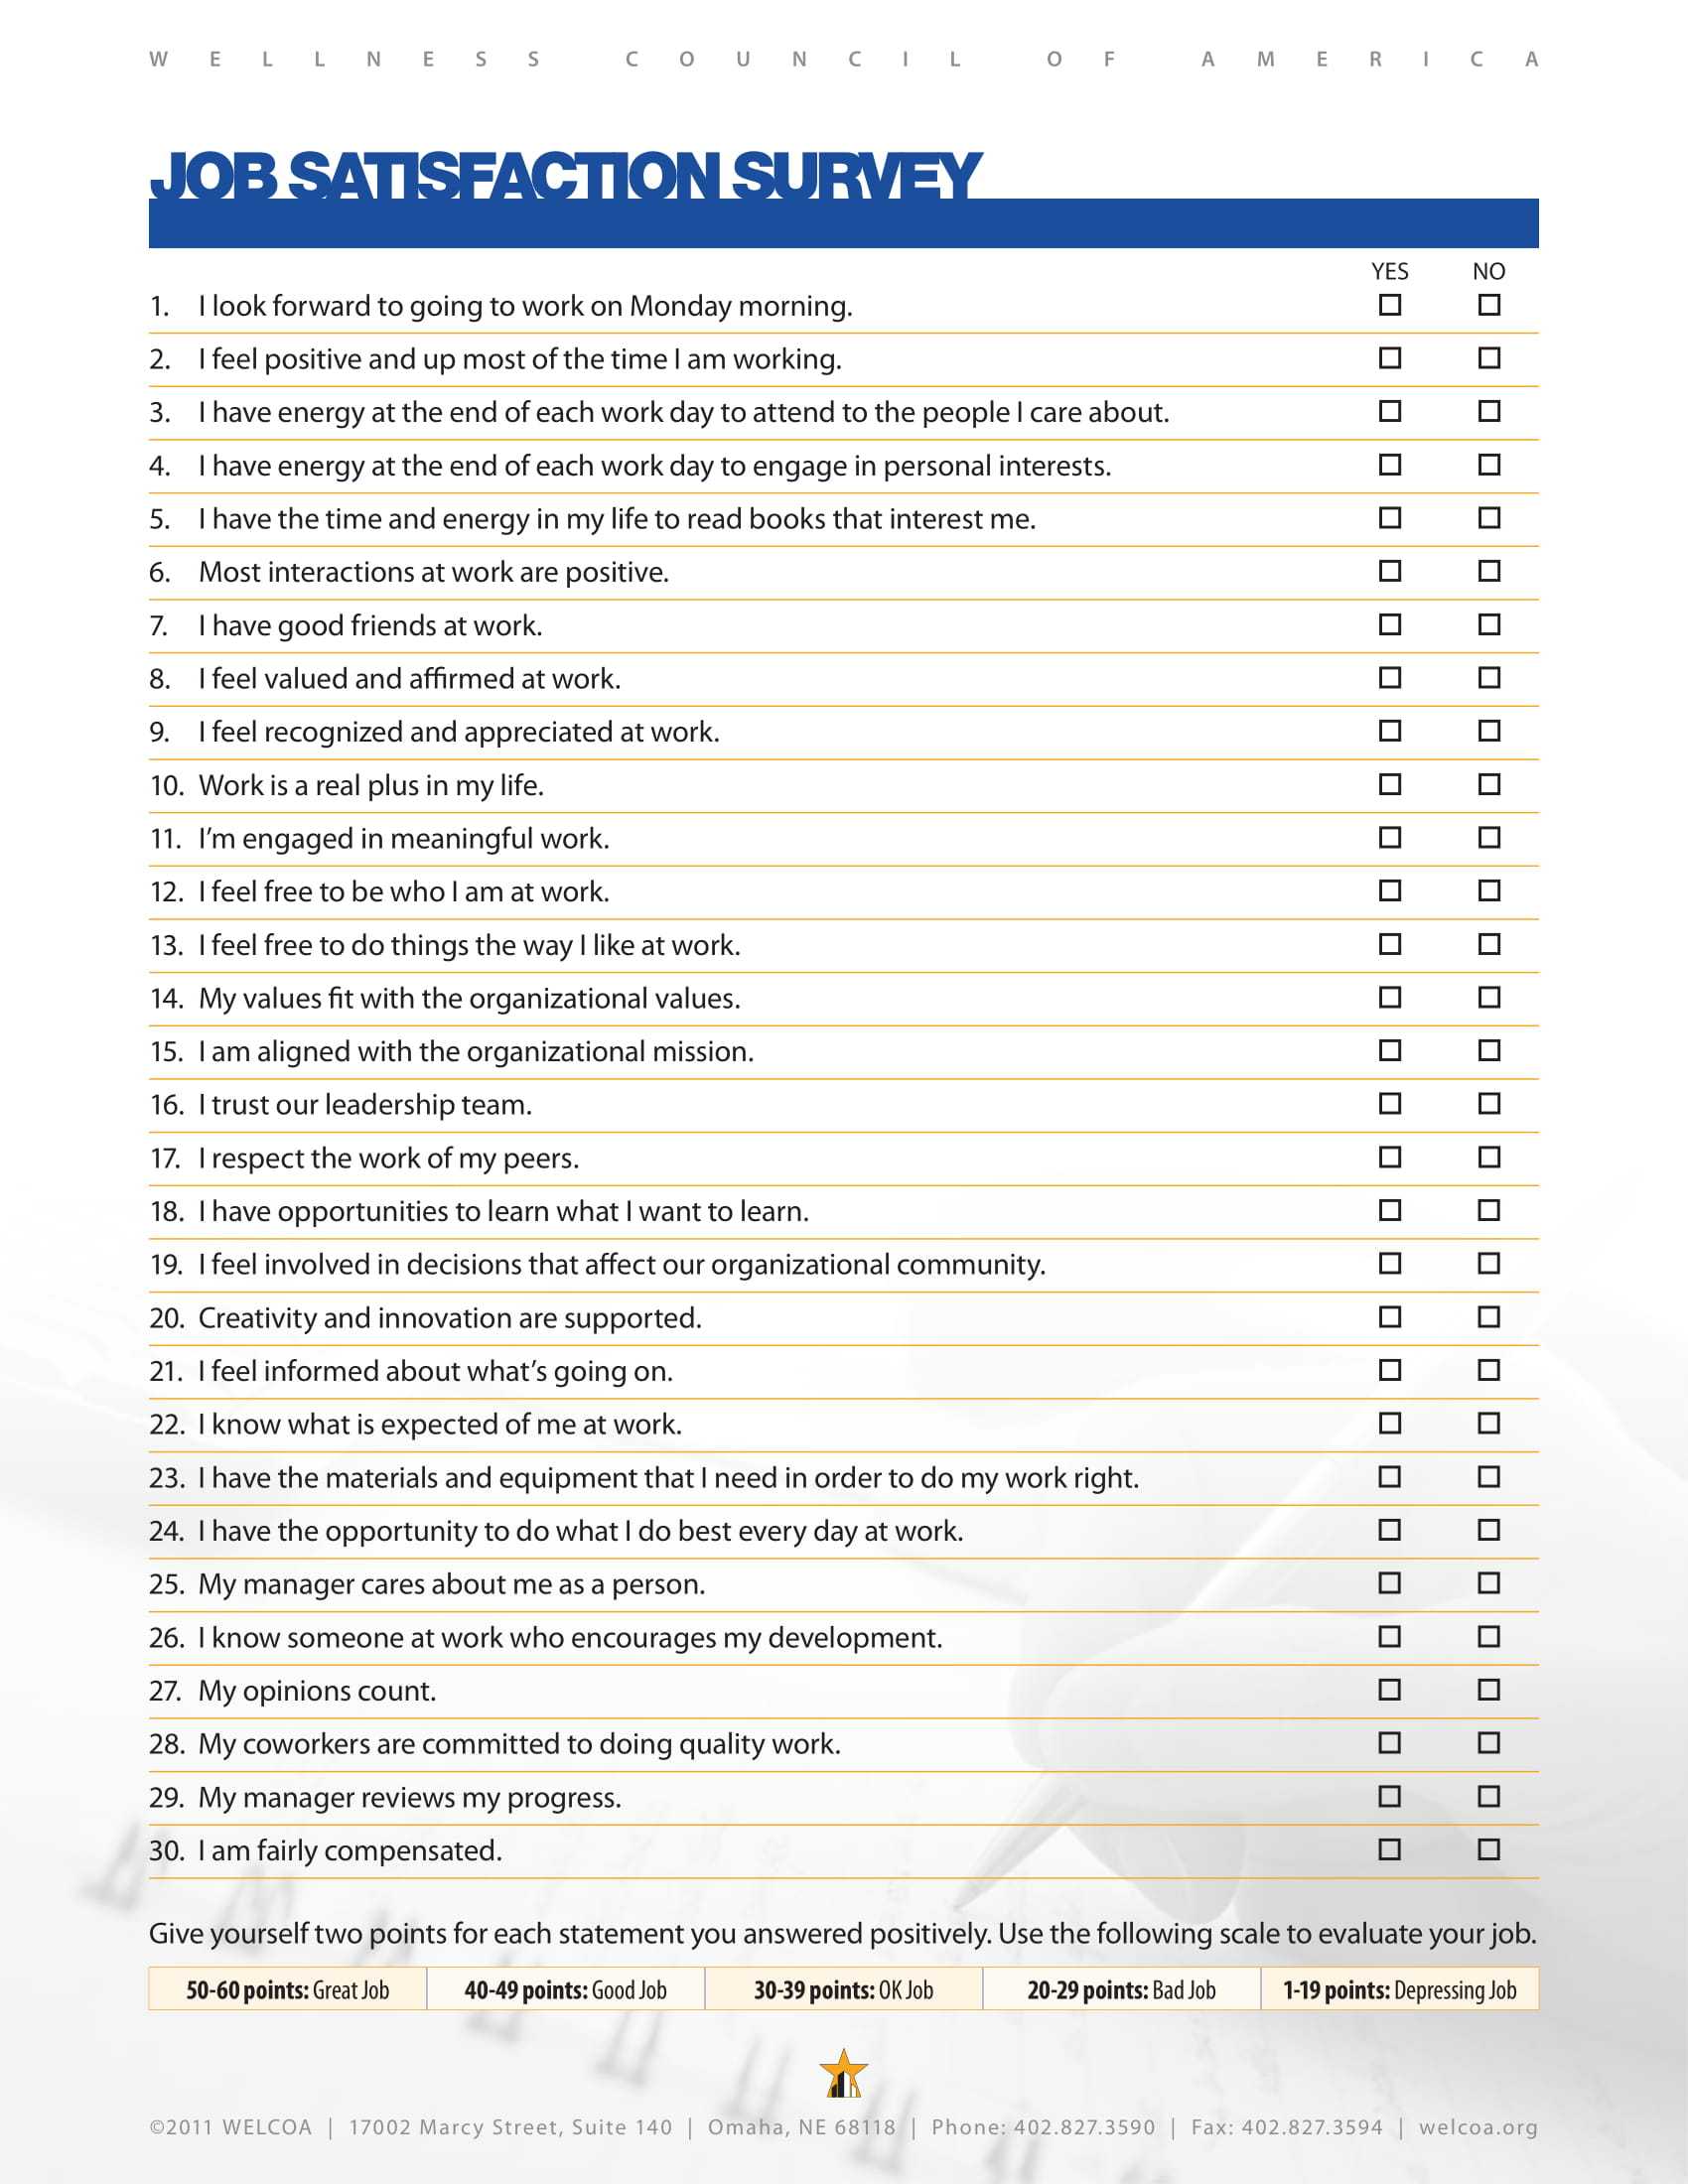 14+ Employee Satisfaction Survey Form Examples - Pdf, Doc With Regard To Employee Satisfaction Survey Template Word